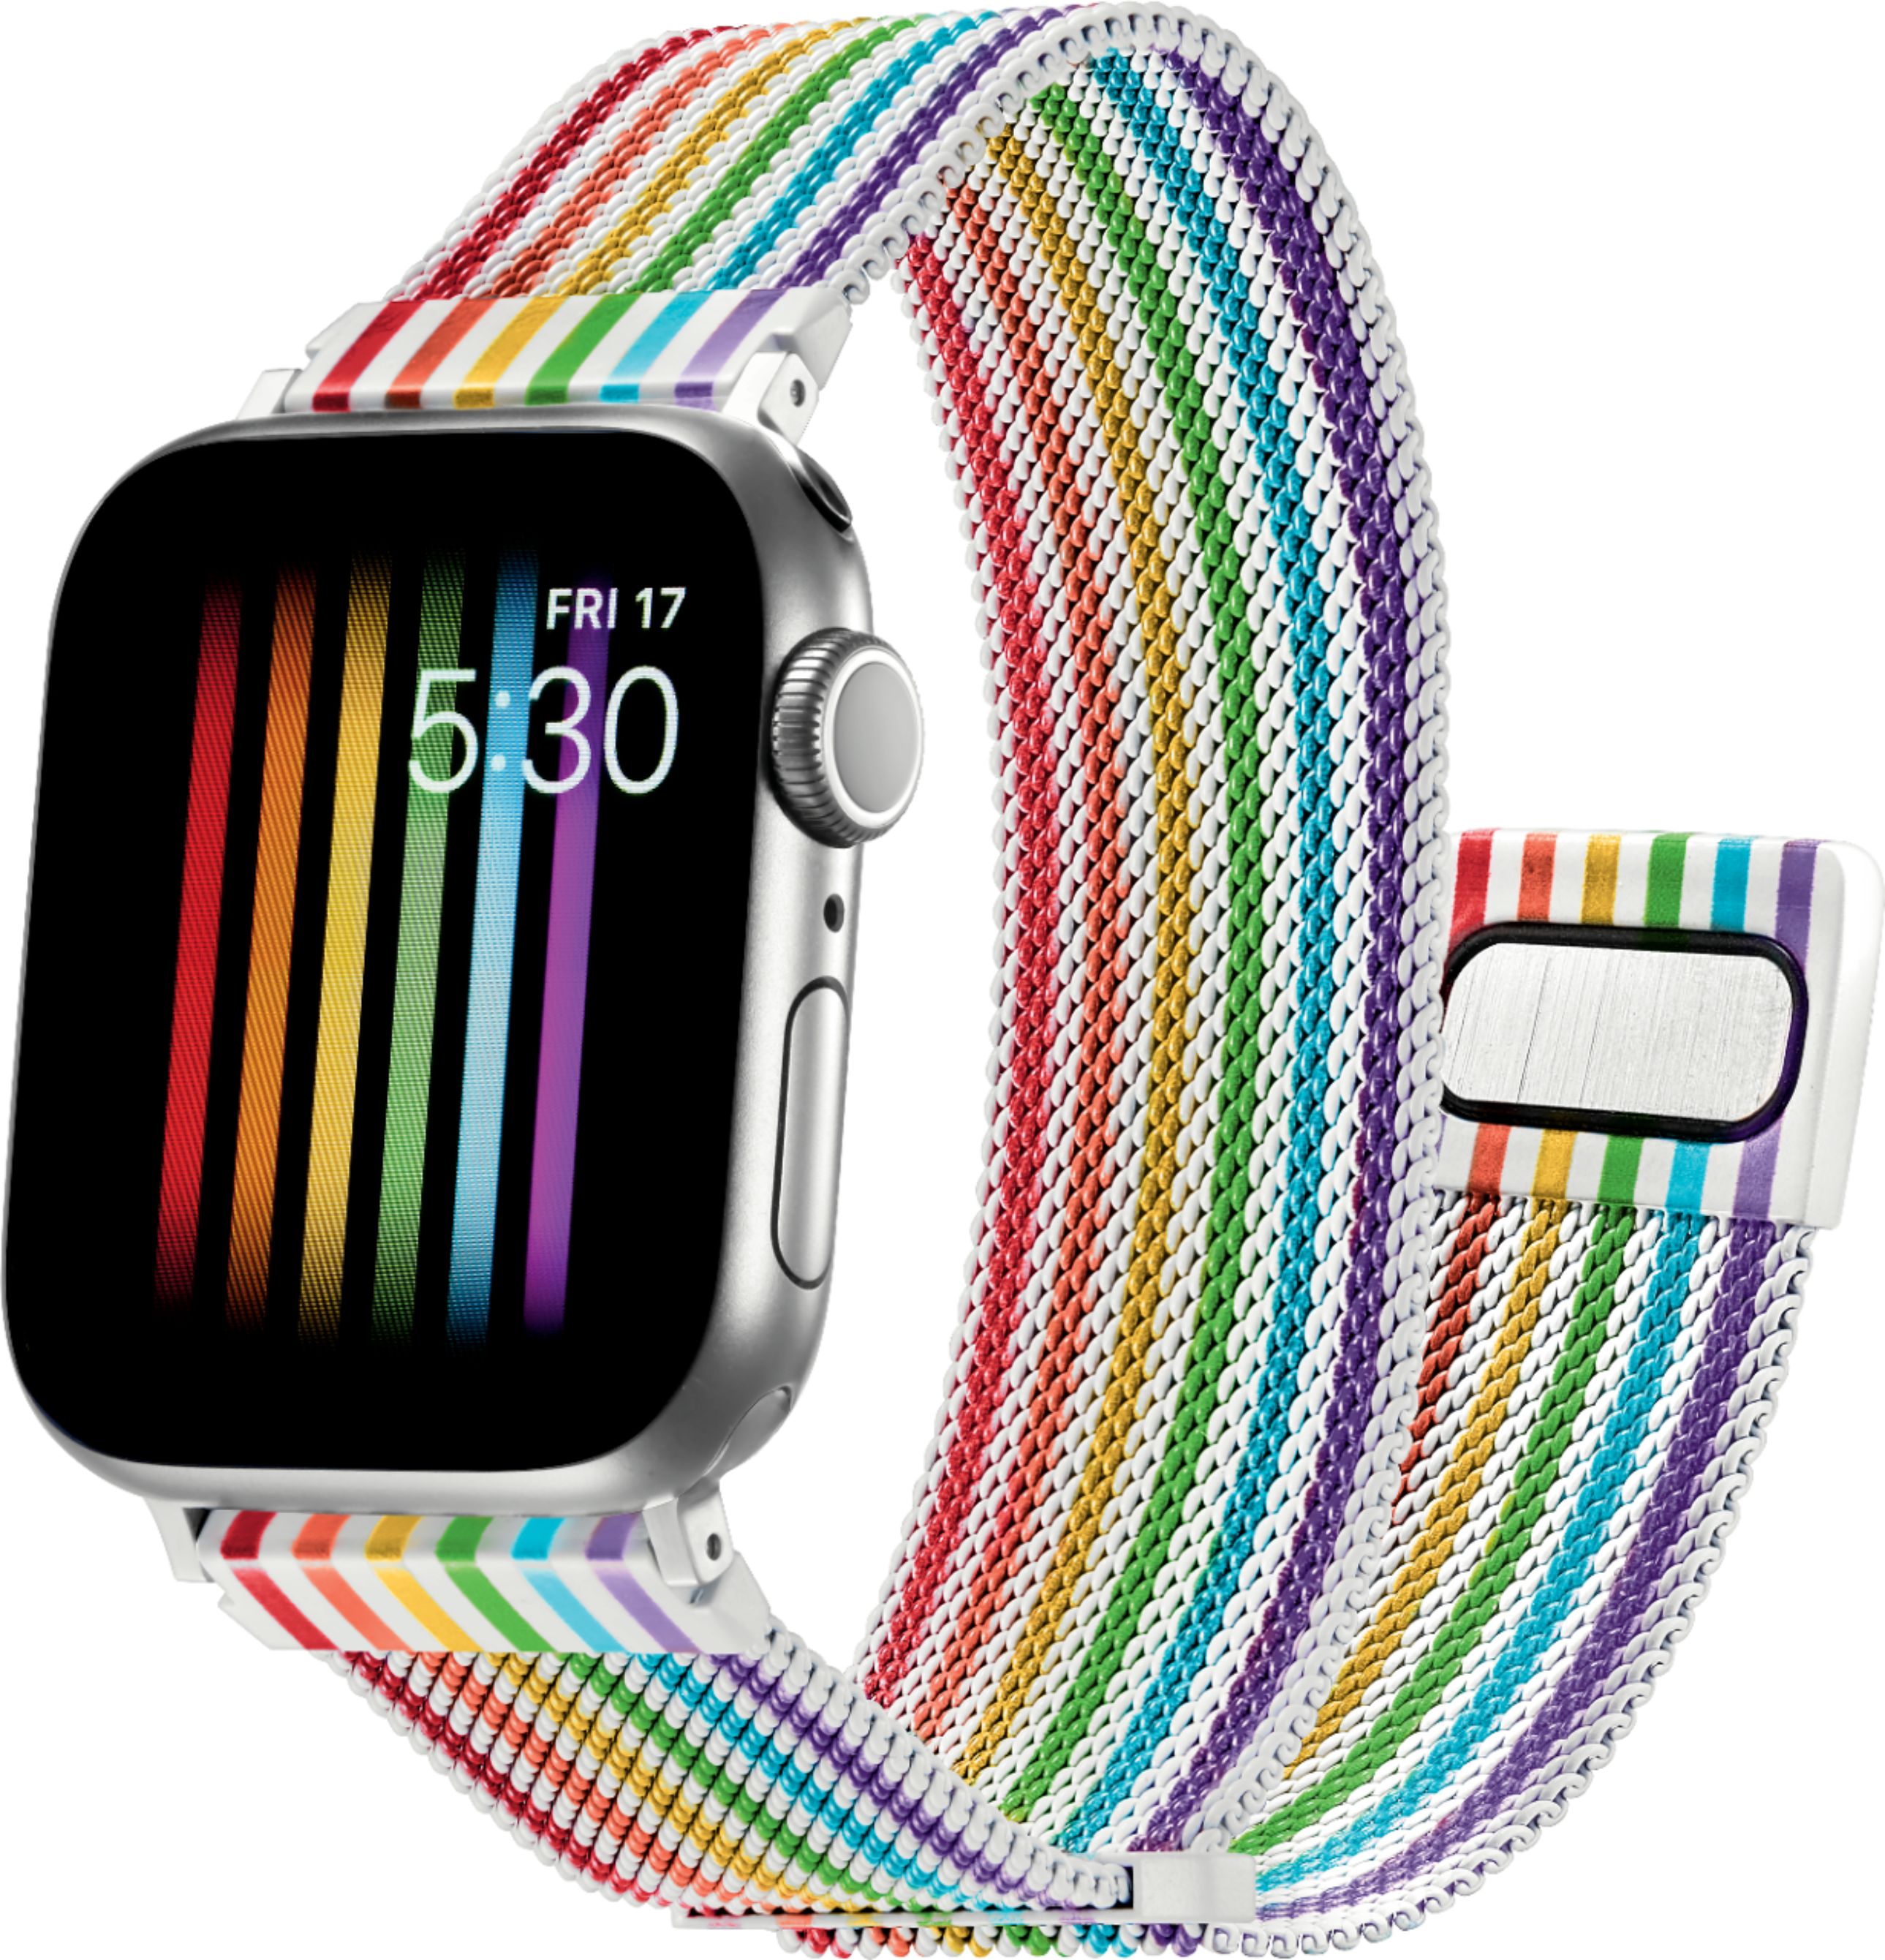 Angle View: Platinum™ - Magnetic Stainless Steel Mesh Band for Apple Watch 38mm, 40mm and Apple Watch Series 7 41mm - Pride Rainbow/White